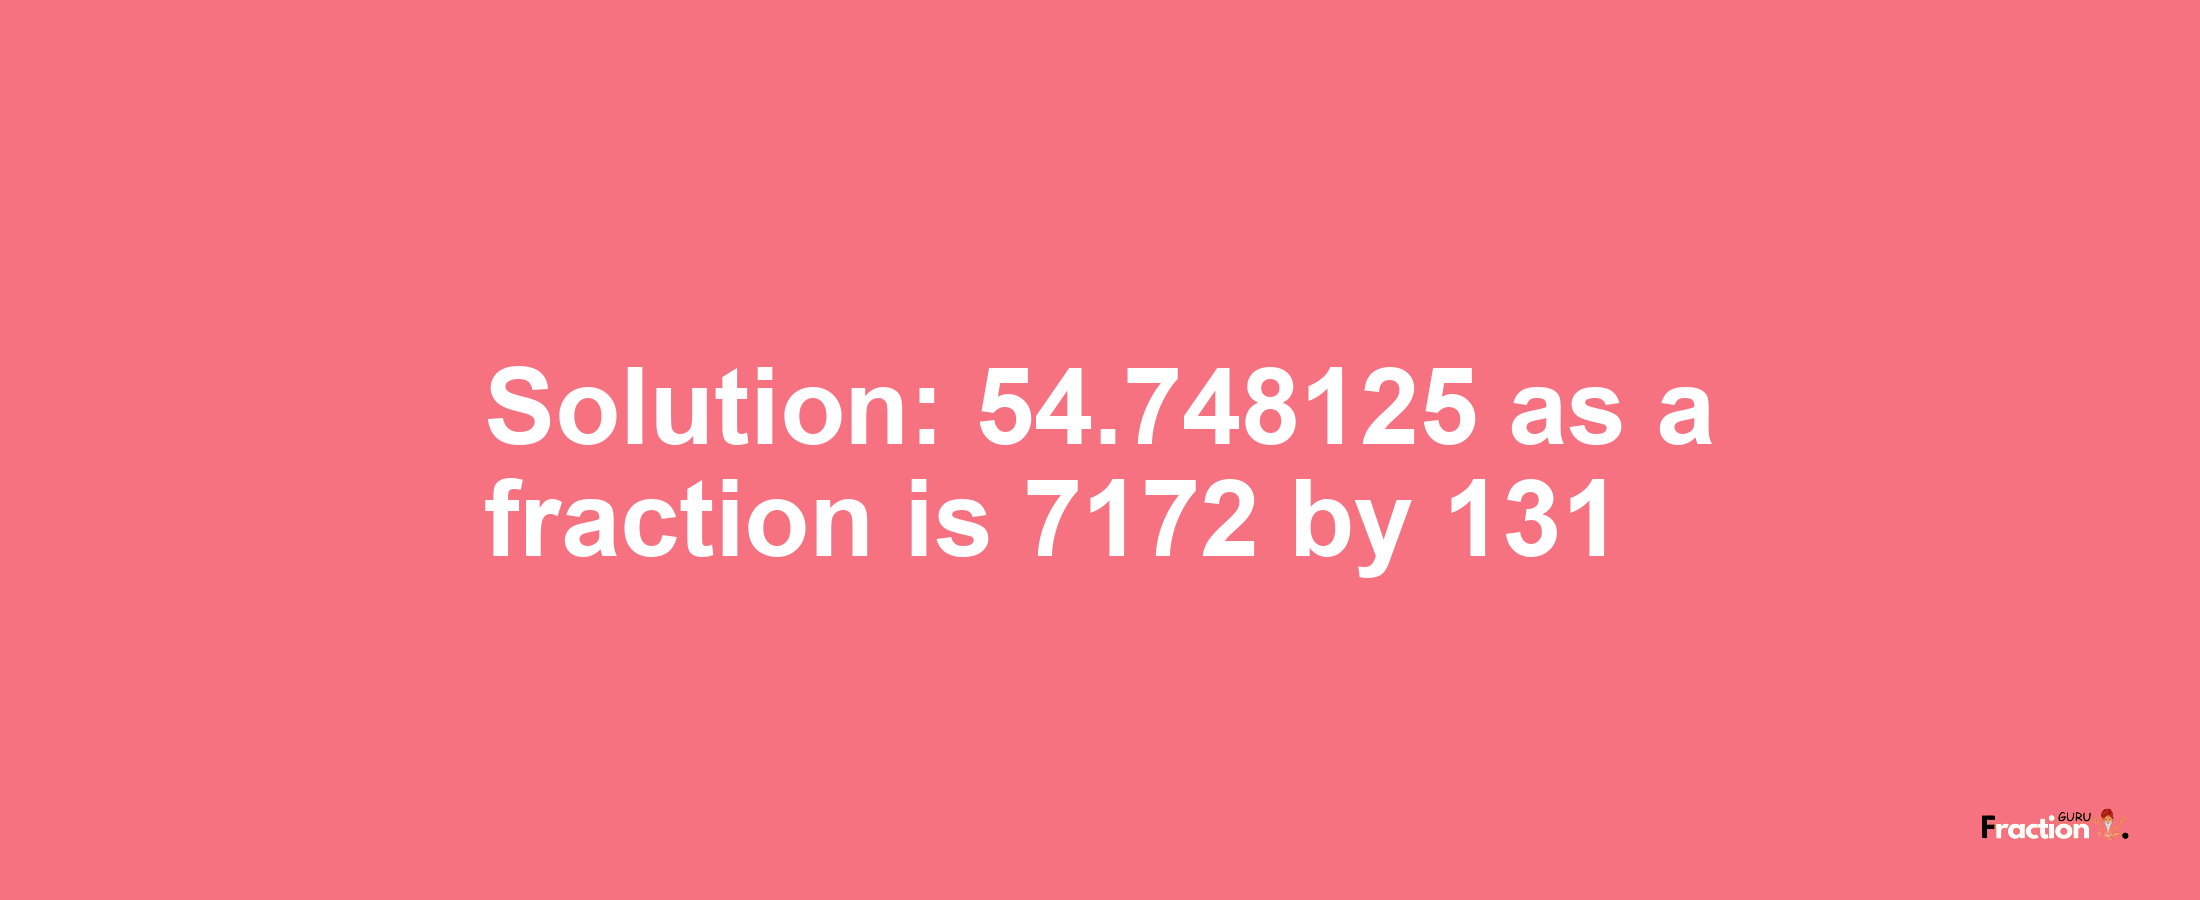 Solution:54.748125 as a fraction is 7172/131